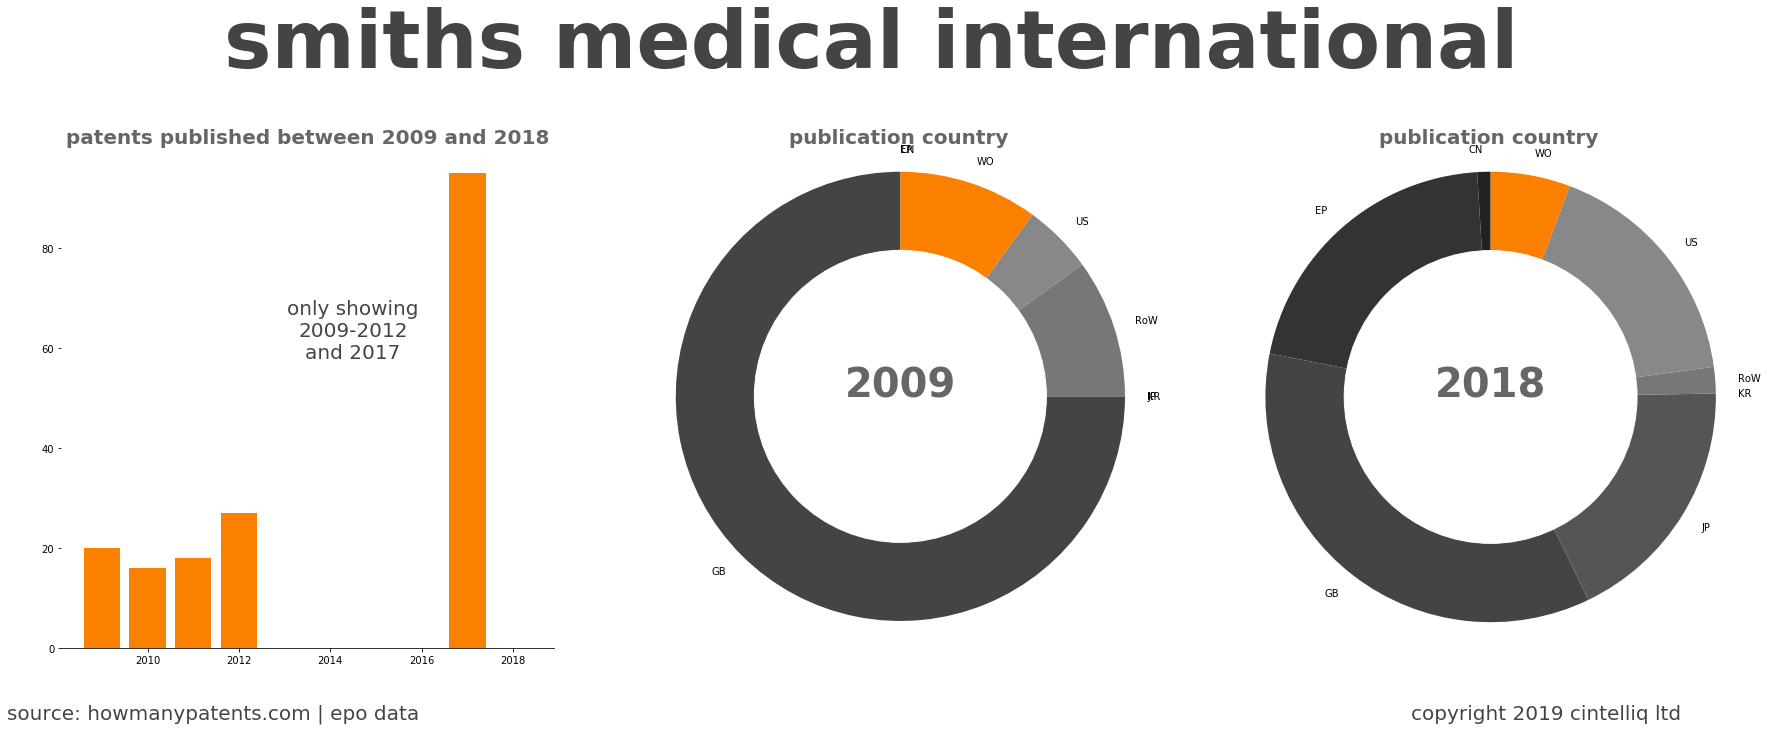 summary of patents for Smiths Medical International